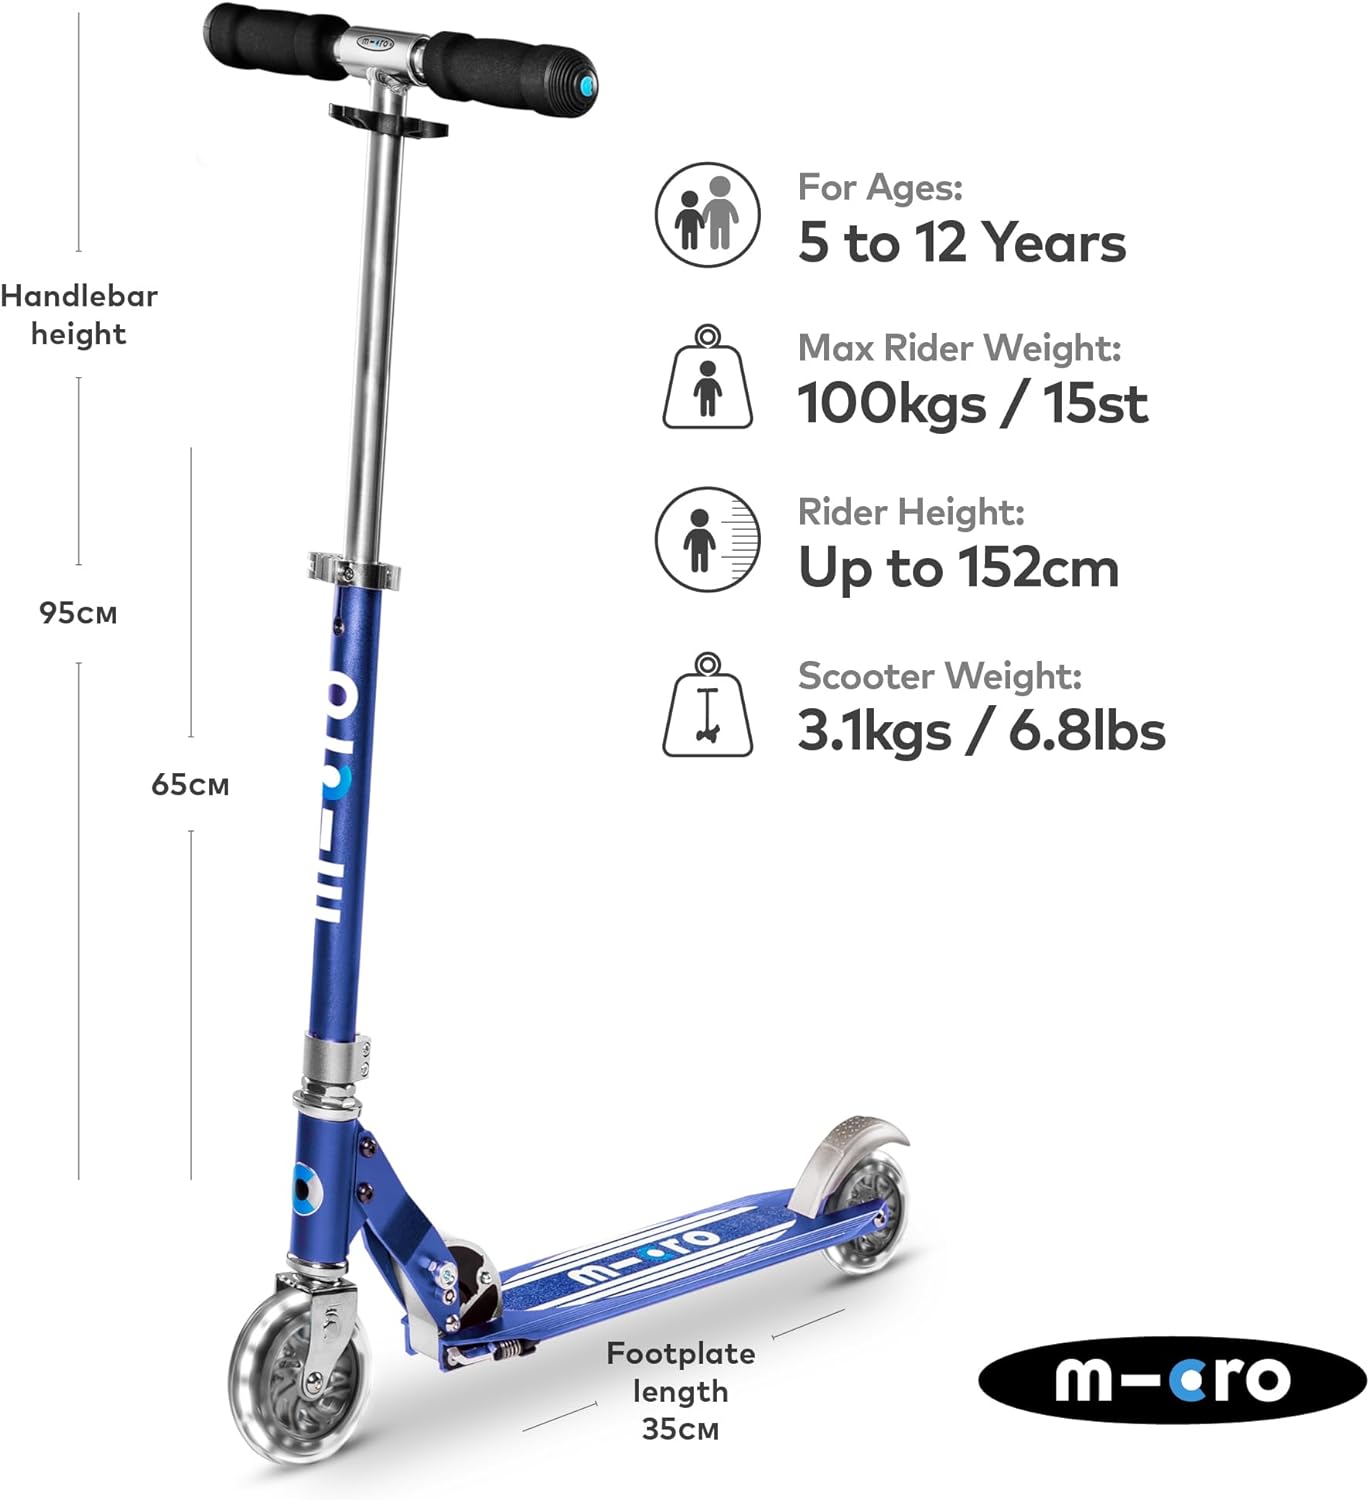 Micro Sprite Scooter with LED Wheels - Blue Stripe - Laadlee